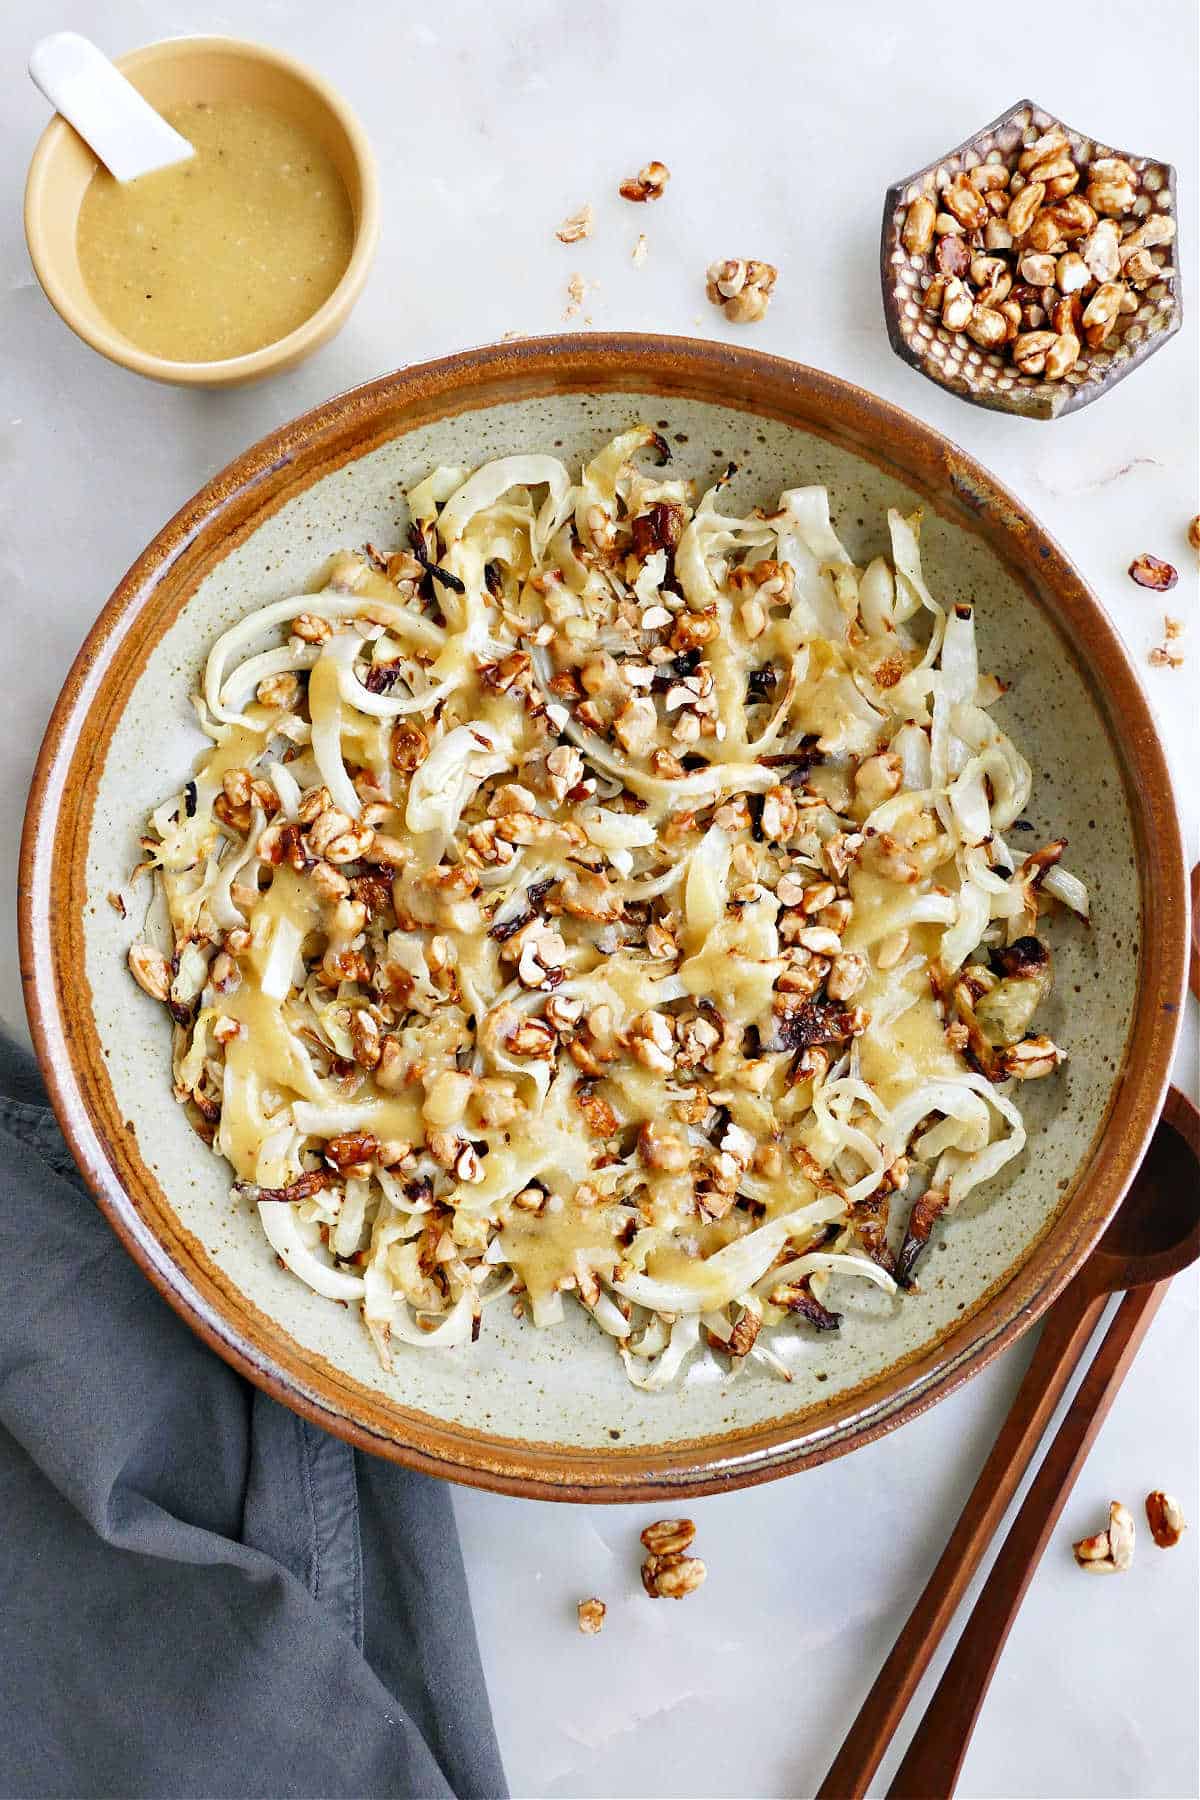 Roasted cabbage salad in a large bowl next to a ramekin of nuts and dressing.